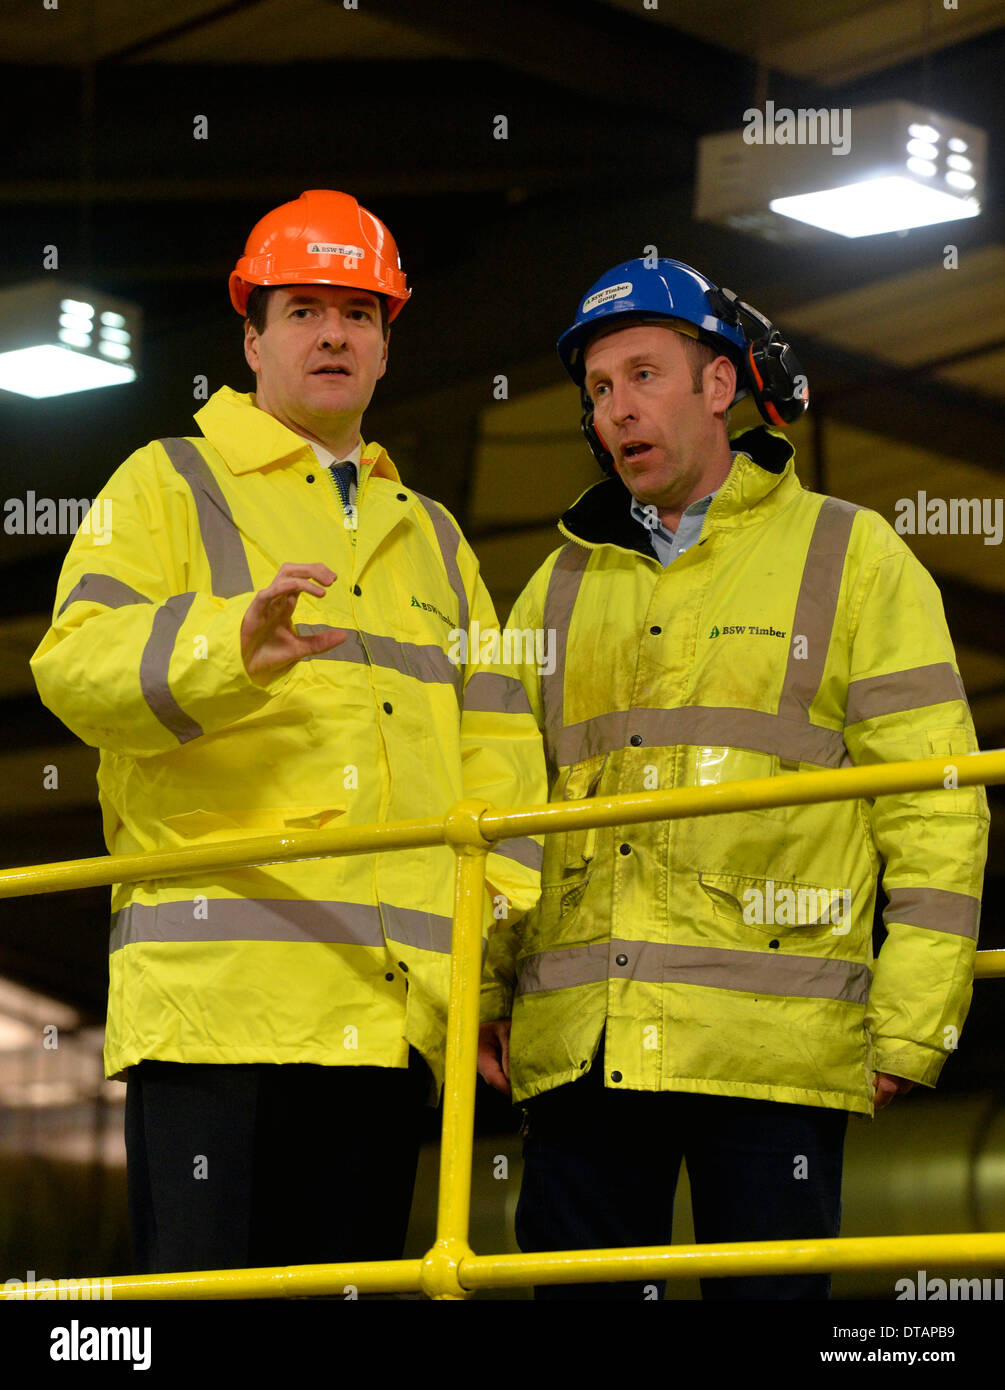 Cargo, Cumbria . 13th Feb, 2014. Chancellor of the Exchequer George Osborne MP visits the BSW Timber Sawmill at Cargo, Carlisle. Mr Osborne toured the Carlisle mill as BSW Timber revealed they were creating 60 new jobs at their Carlisle and Dalbeattie Sawmills. George Osborne MP (left) chats with BSW employee Mark Smith: 13 February 2014 STUART WALKER  Stuart Walker Photography 2014 Credit:  STUART WALKER/Alamy Live News Stock Photo